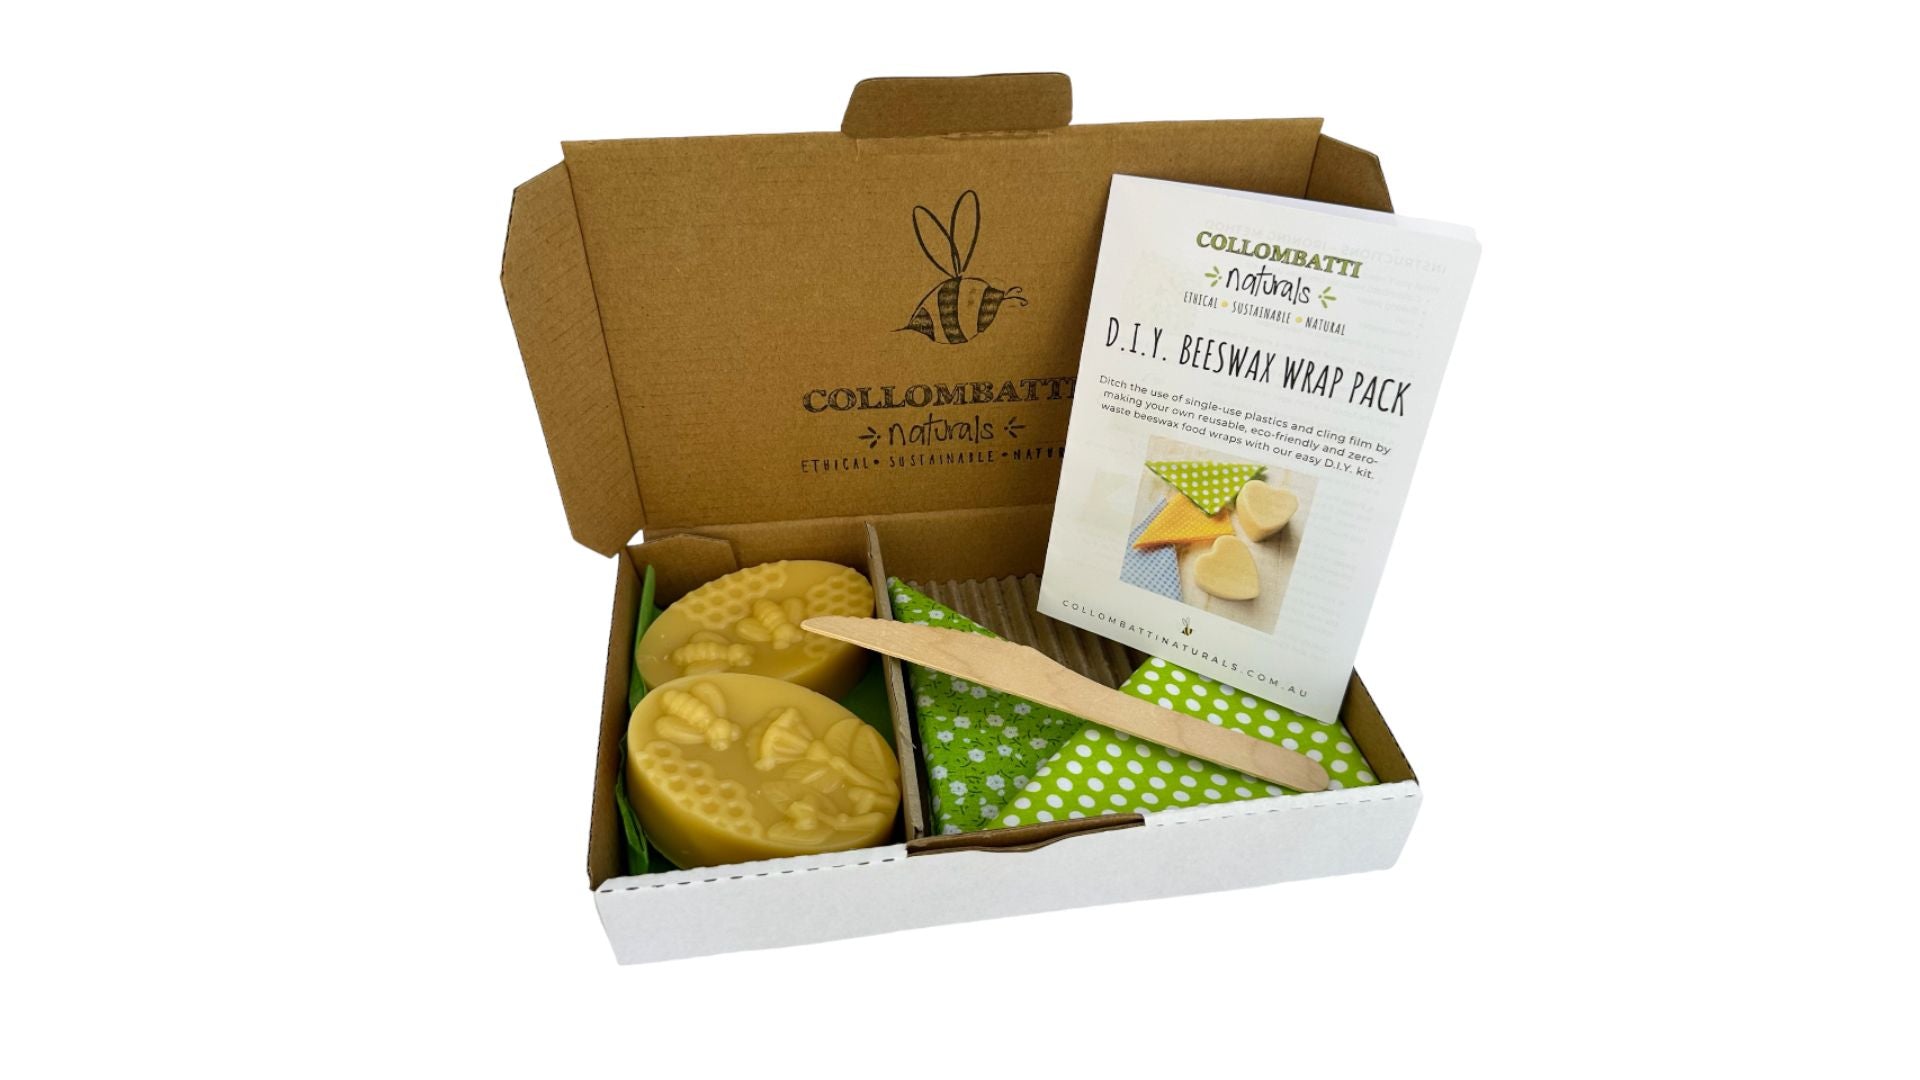 Collombatti Naturals Beeswax Wraps FAQ picture of our beeswax wrap making kit